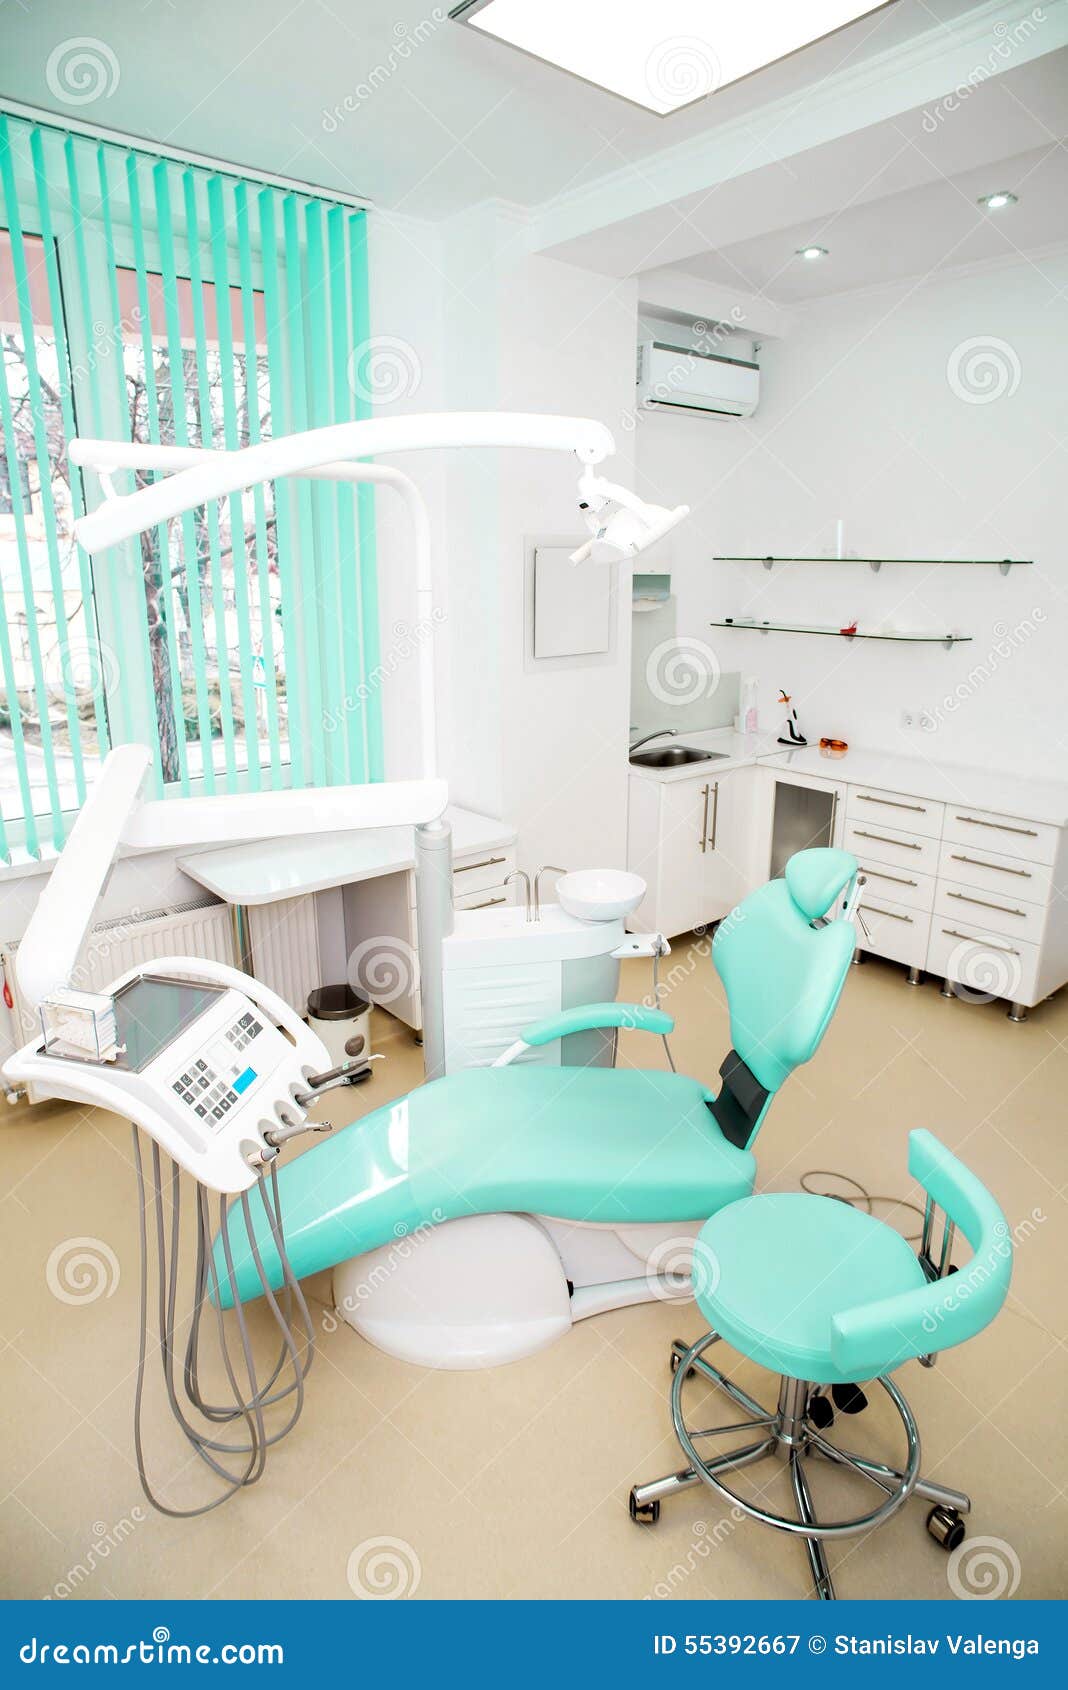 Dental Clinic Interior Design With Chair And Tools Stock